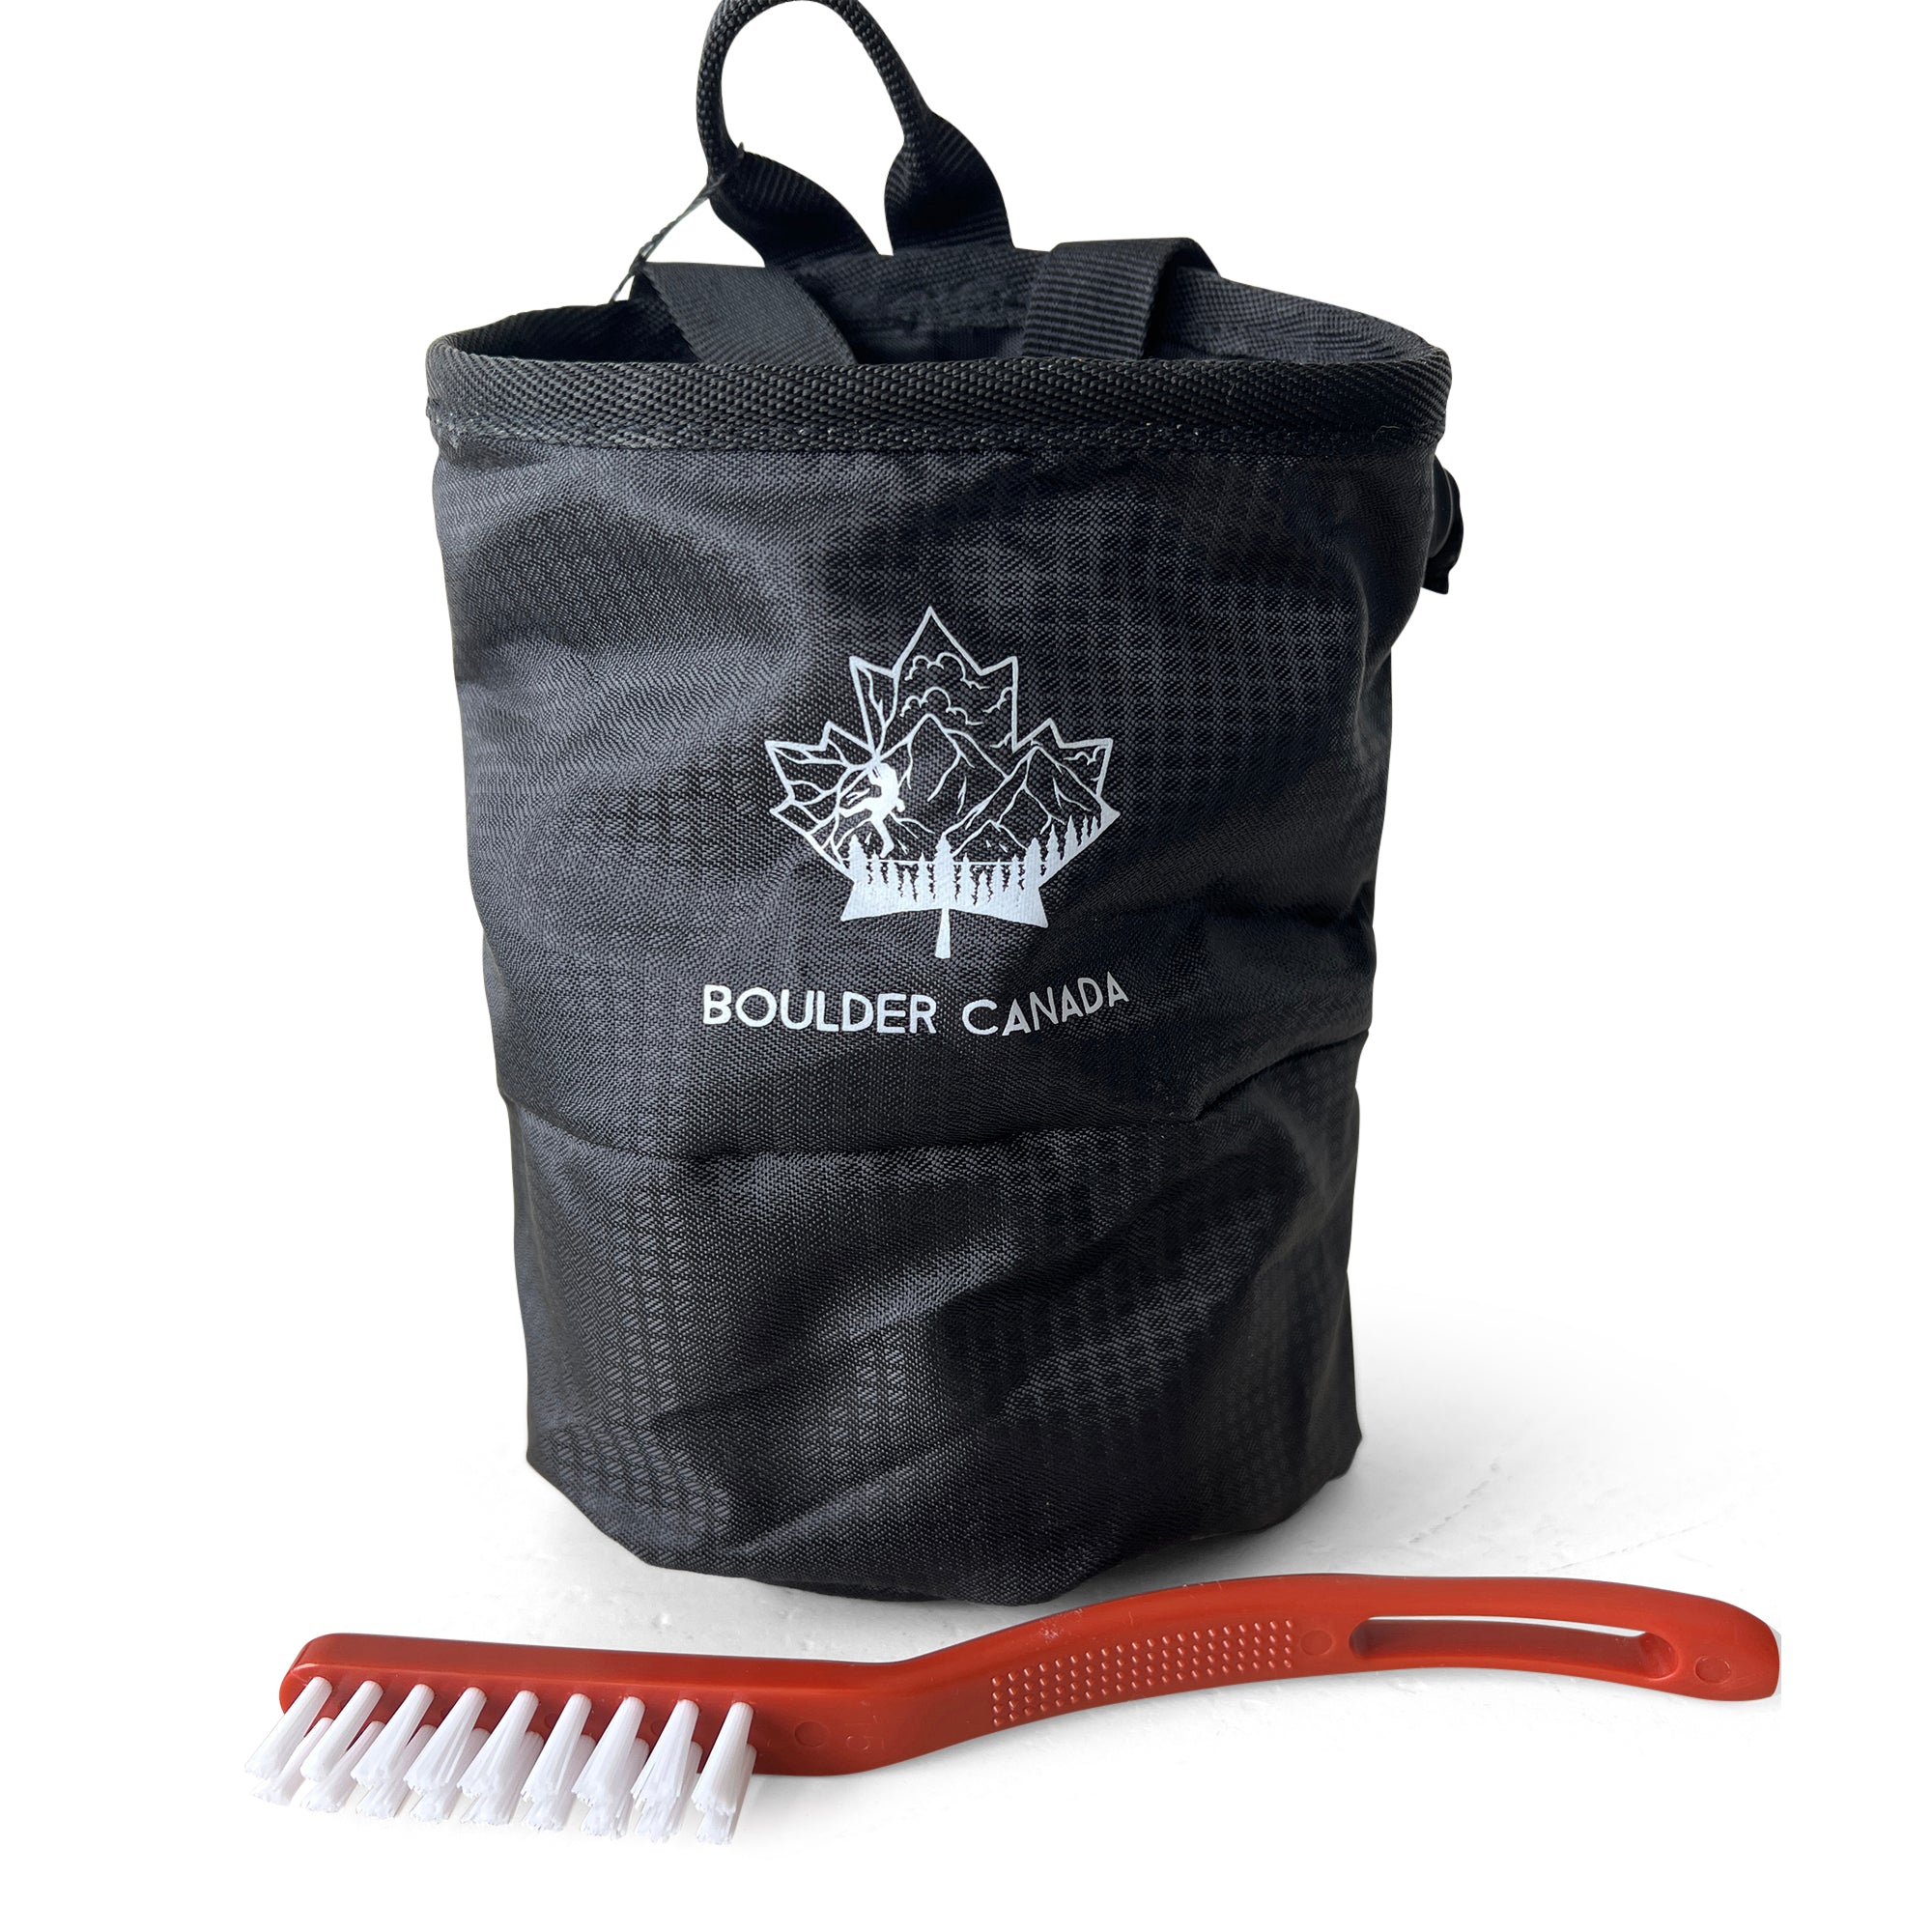 Get Climbing Starter Kit - Boulder Canada-Get Climbing Starter Kit - Boulder Canada-Chalk bag to store loose powdered chalk or chalk ball, used for rock climbing and bouldering comes equipped with a cleaning brush to clean holds as you climb